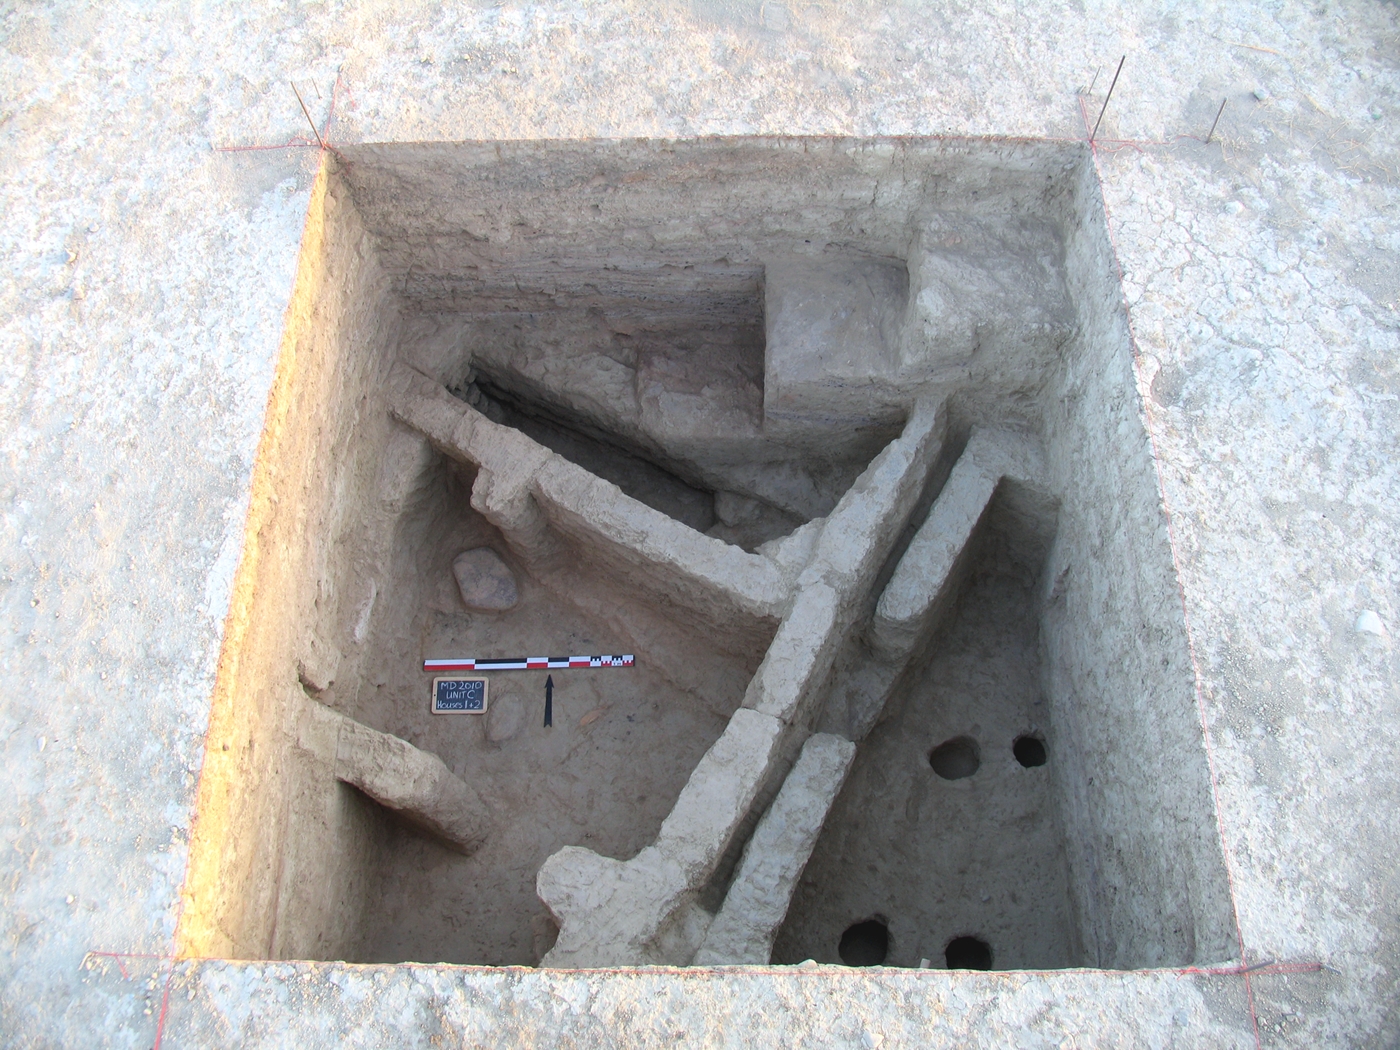 Portions of Houses 7 and 8. Note the pits dug into an early floor of House 8, perhaps for storage purposes. The closely spaced but nonetheless separate walls of the two houses – the southeastern wall of House 7 and the northwestern wall of House 8 – are a typical feature of the Aeneolithic building practices in Monjukli Depe.